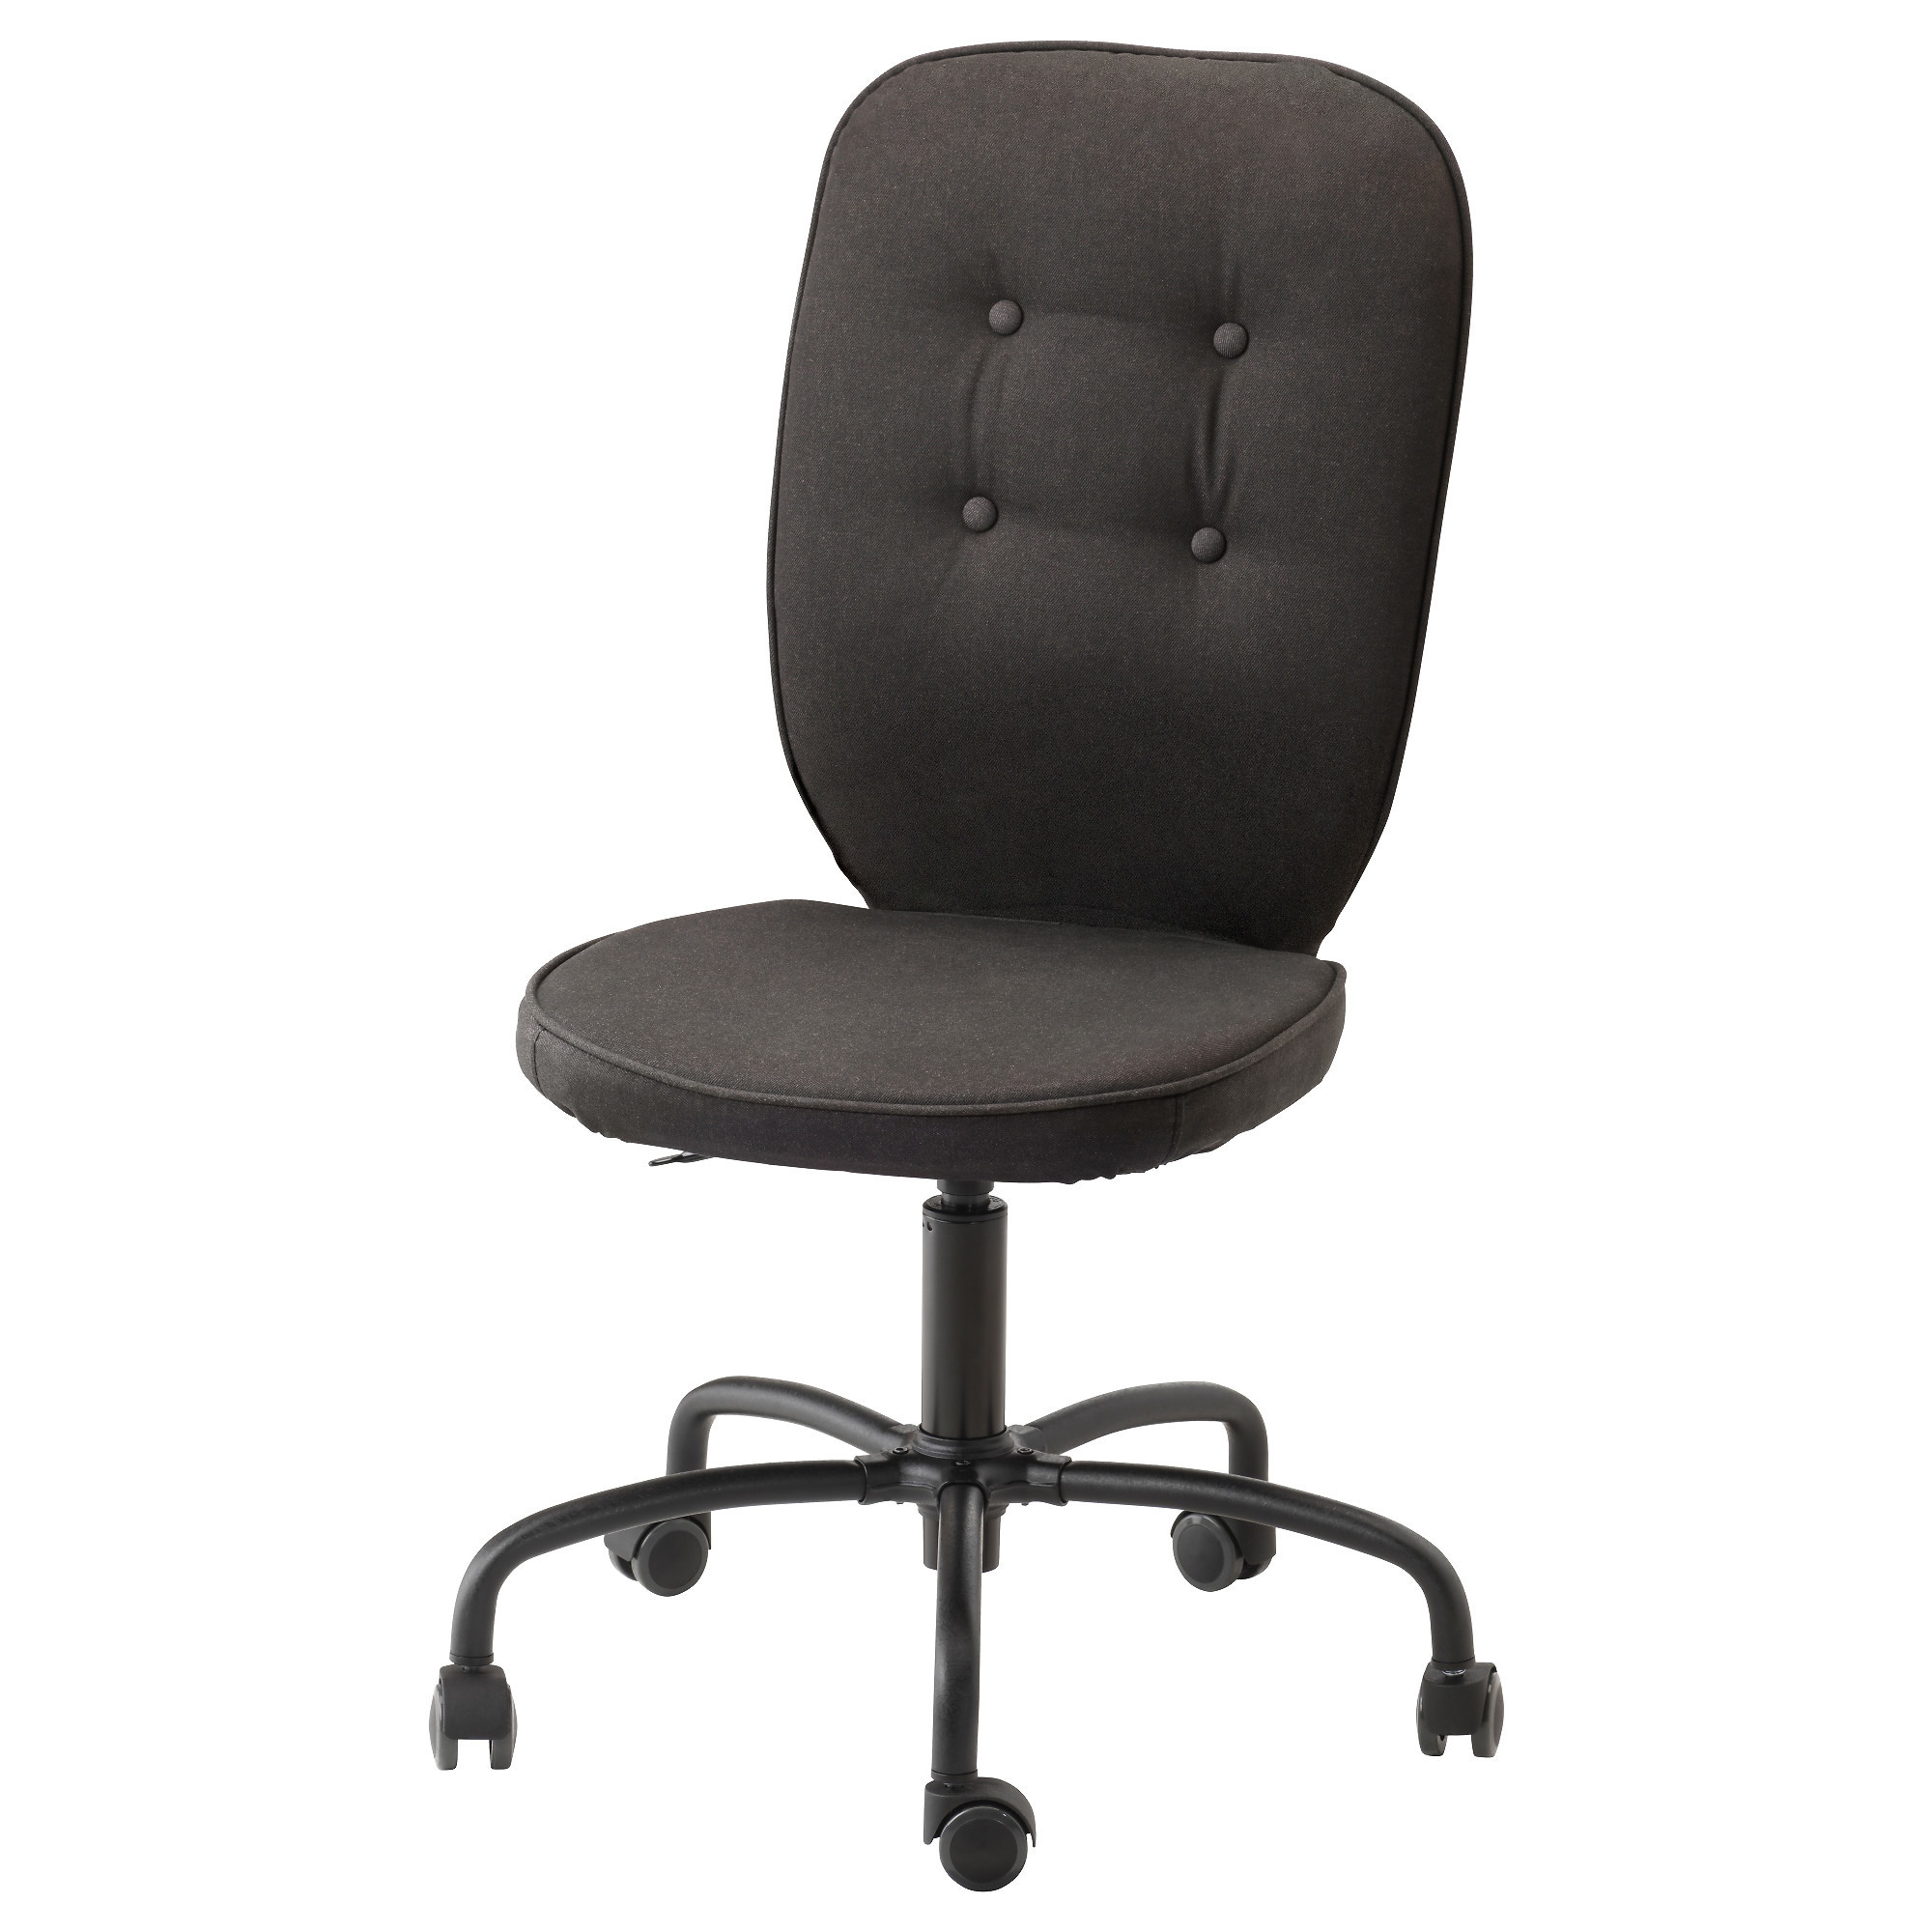 ikea lillha jden swivel chair you sit comfortably since the chair is adjustable in height